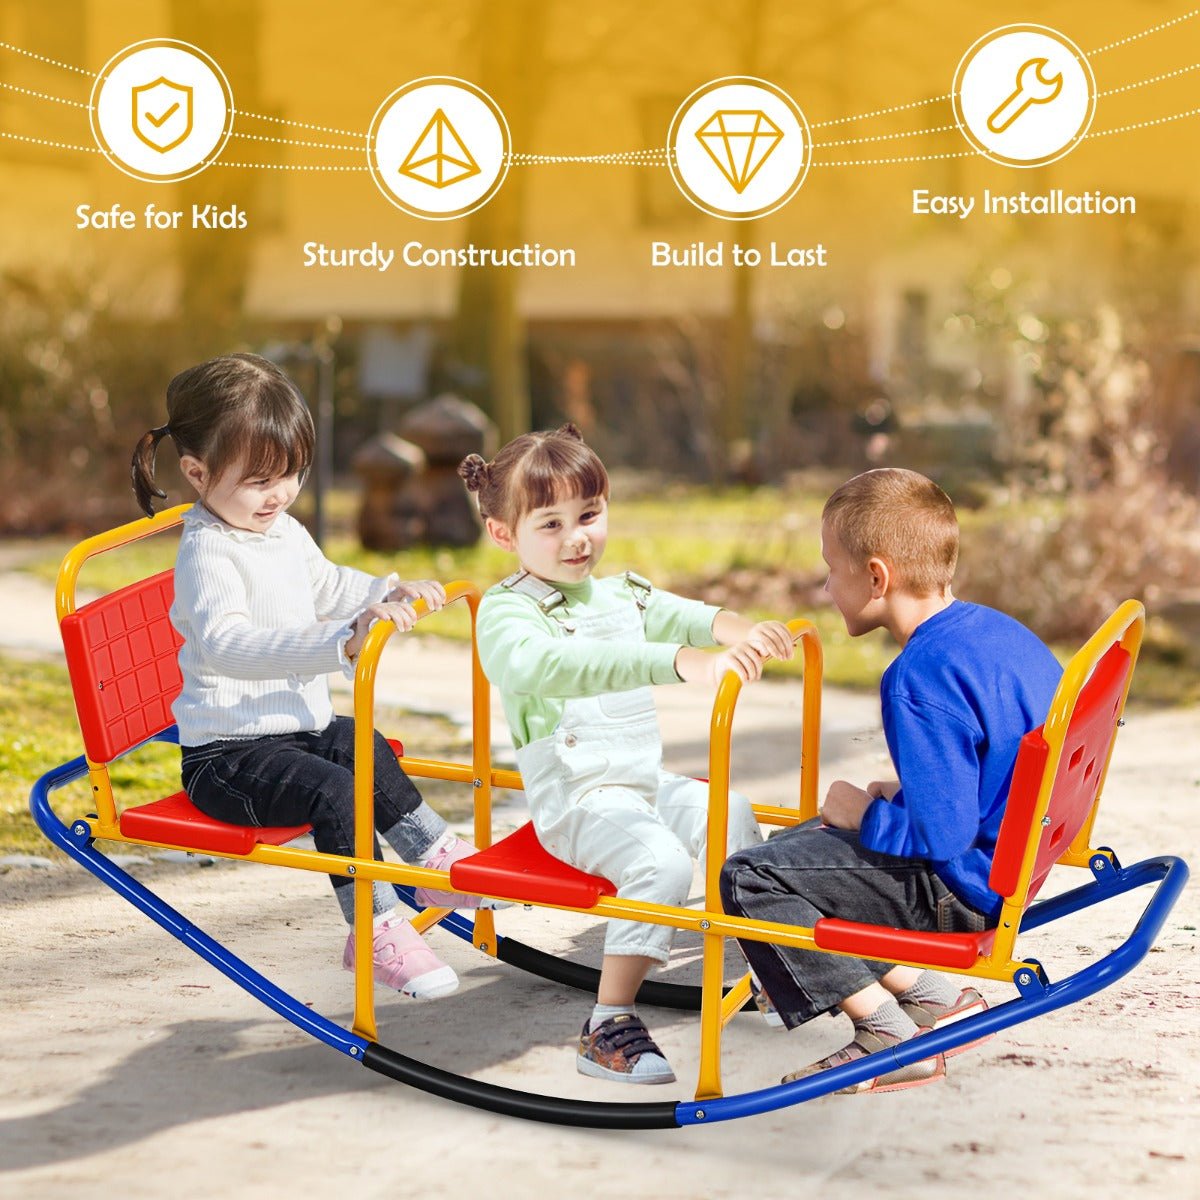 Metal Rocking Seesaw for Kids: Handlebars for Secure Play